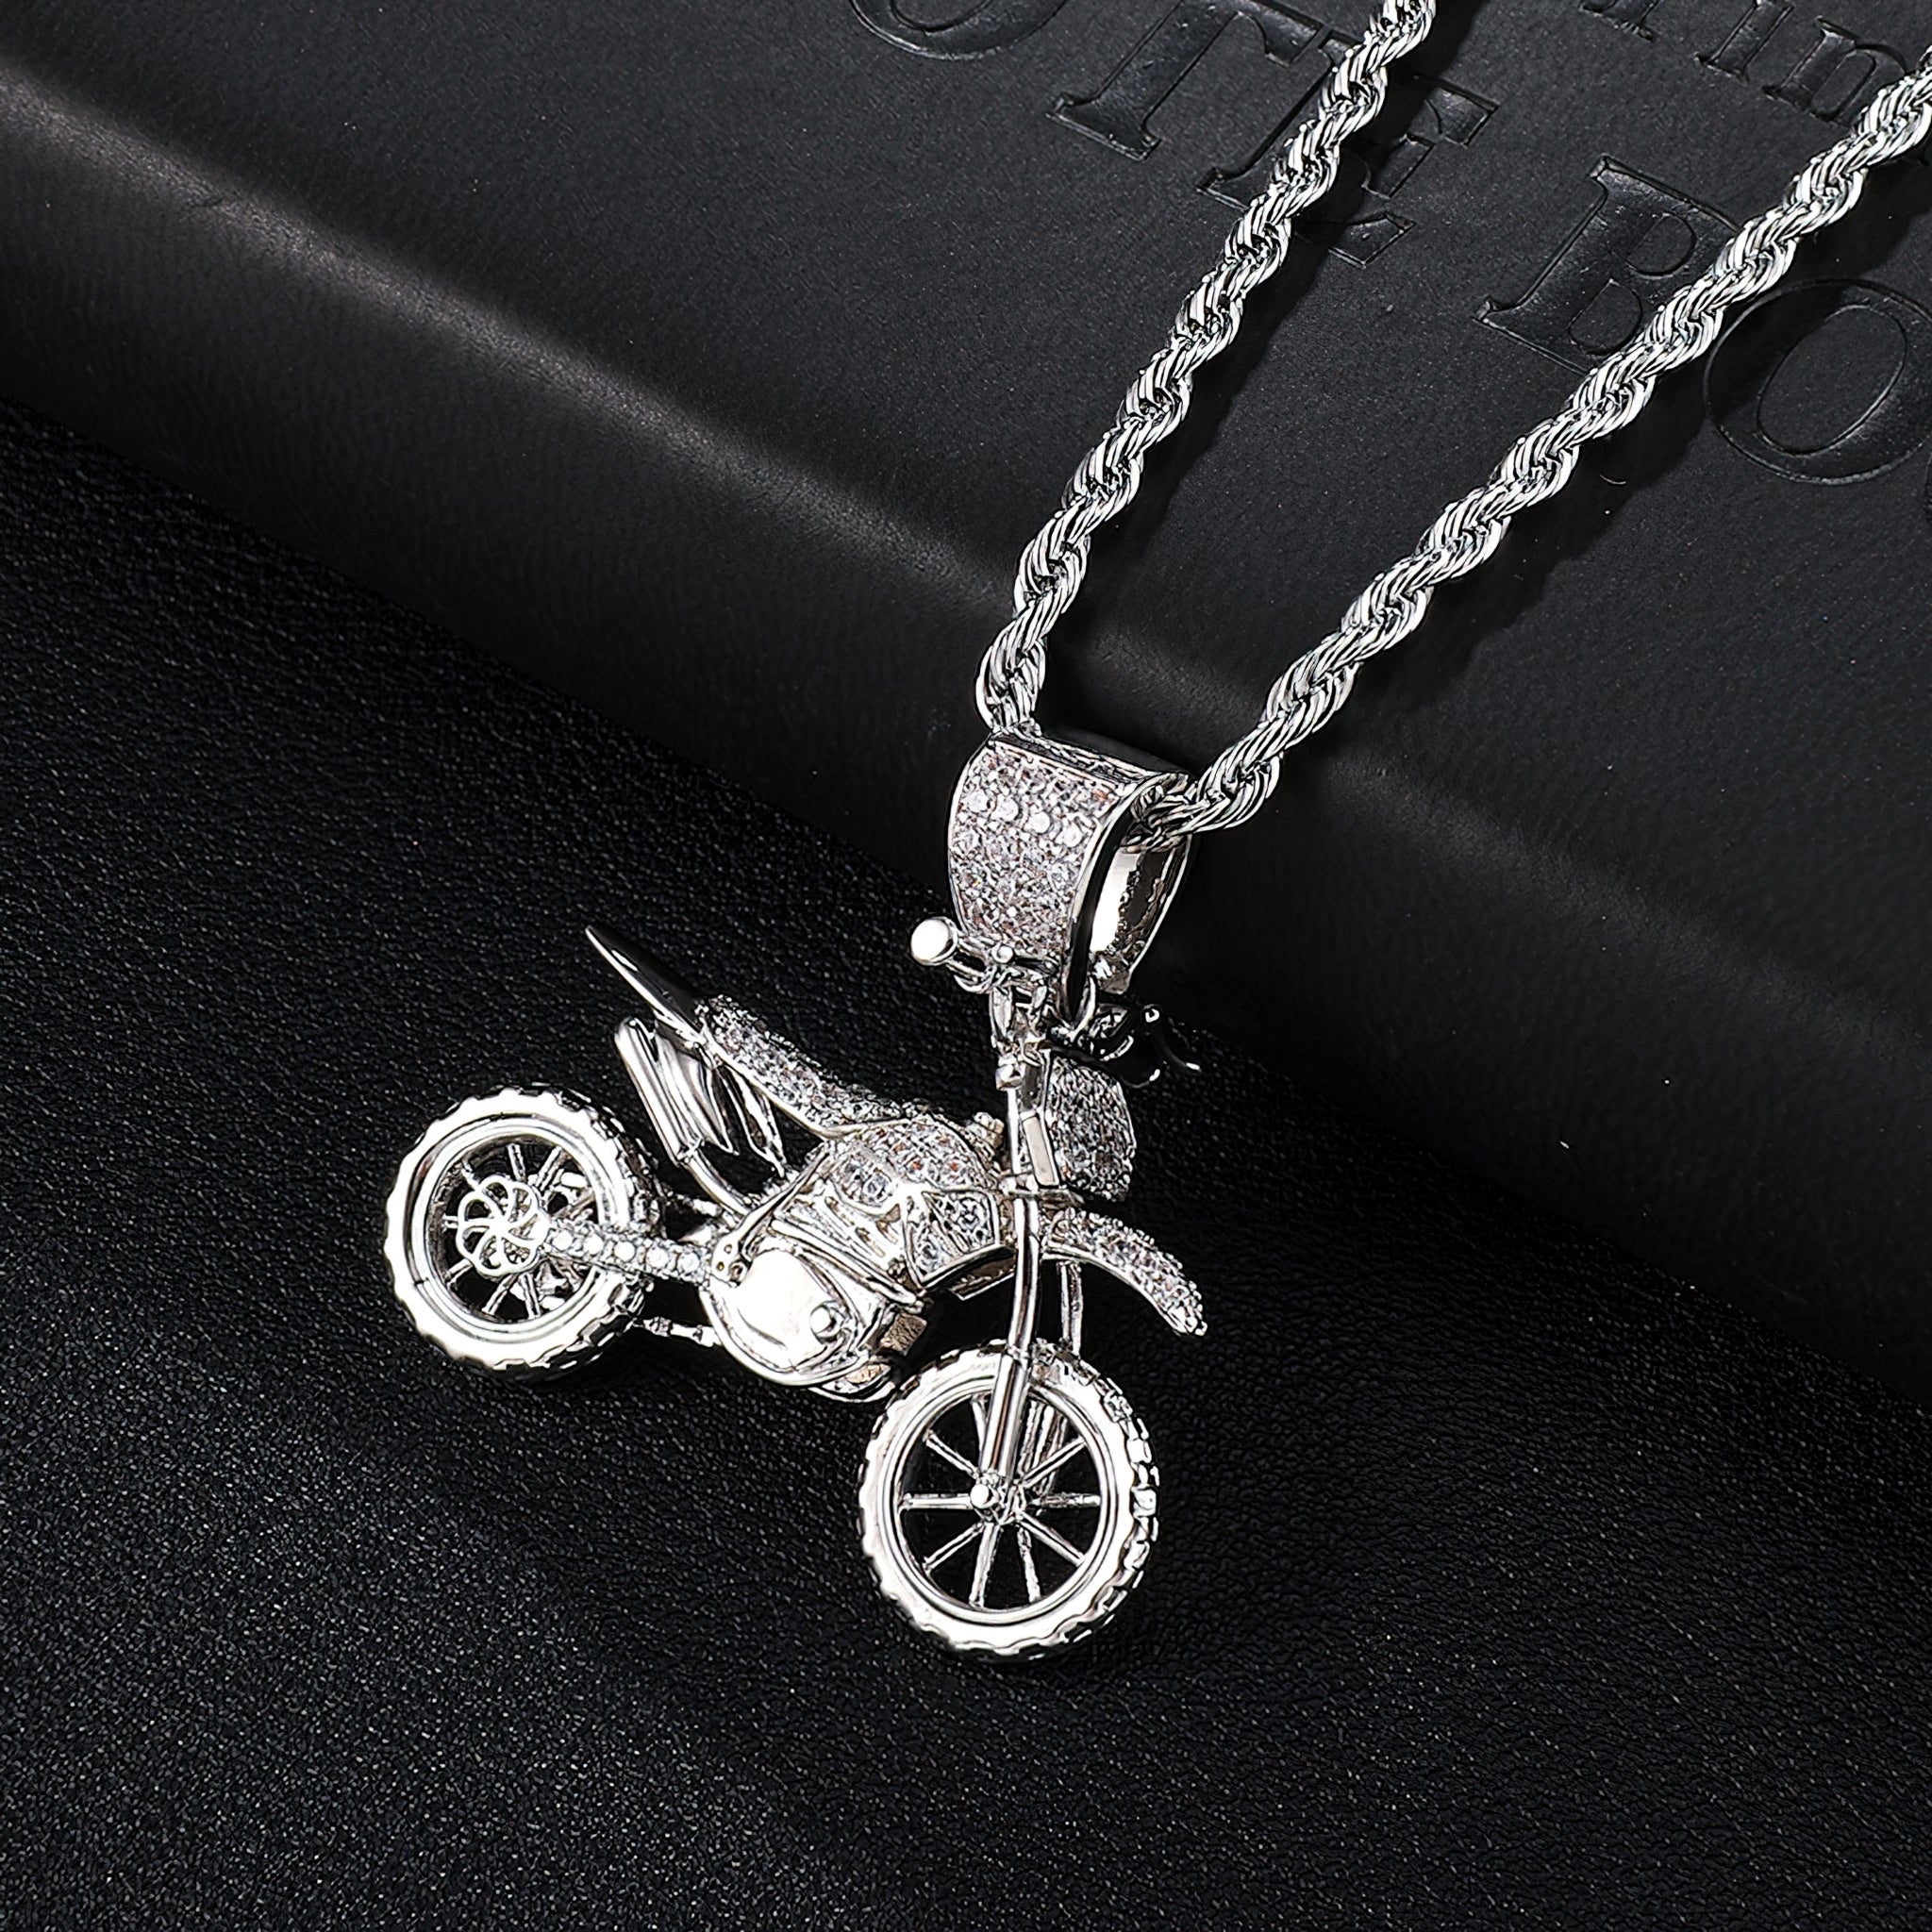 Buy In Memory of Dirt Bike Necklace, Motocross, Motomom, Hand Stamped  Personalized Motorcycle Necklace Online in India - Etsy